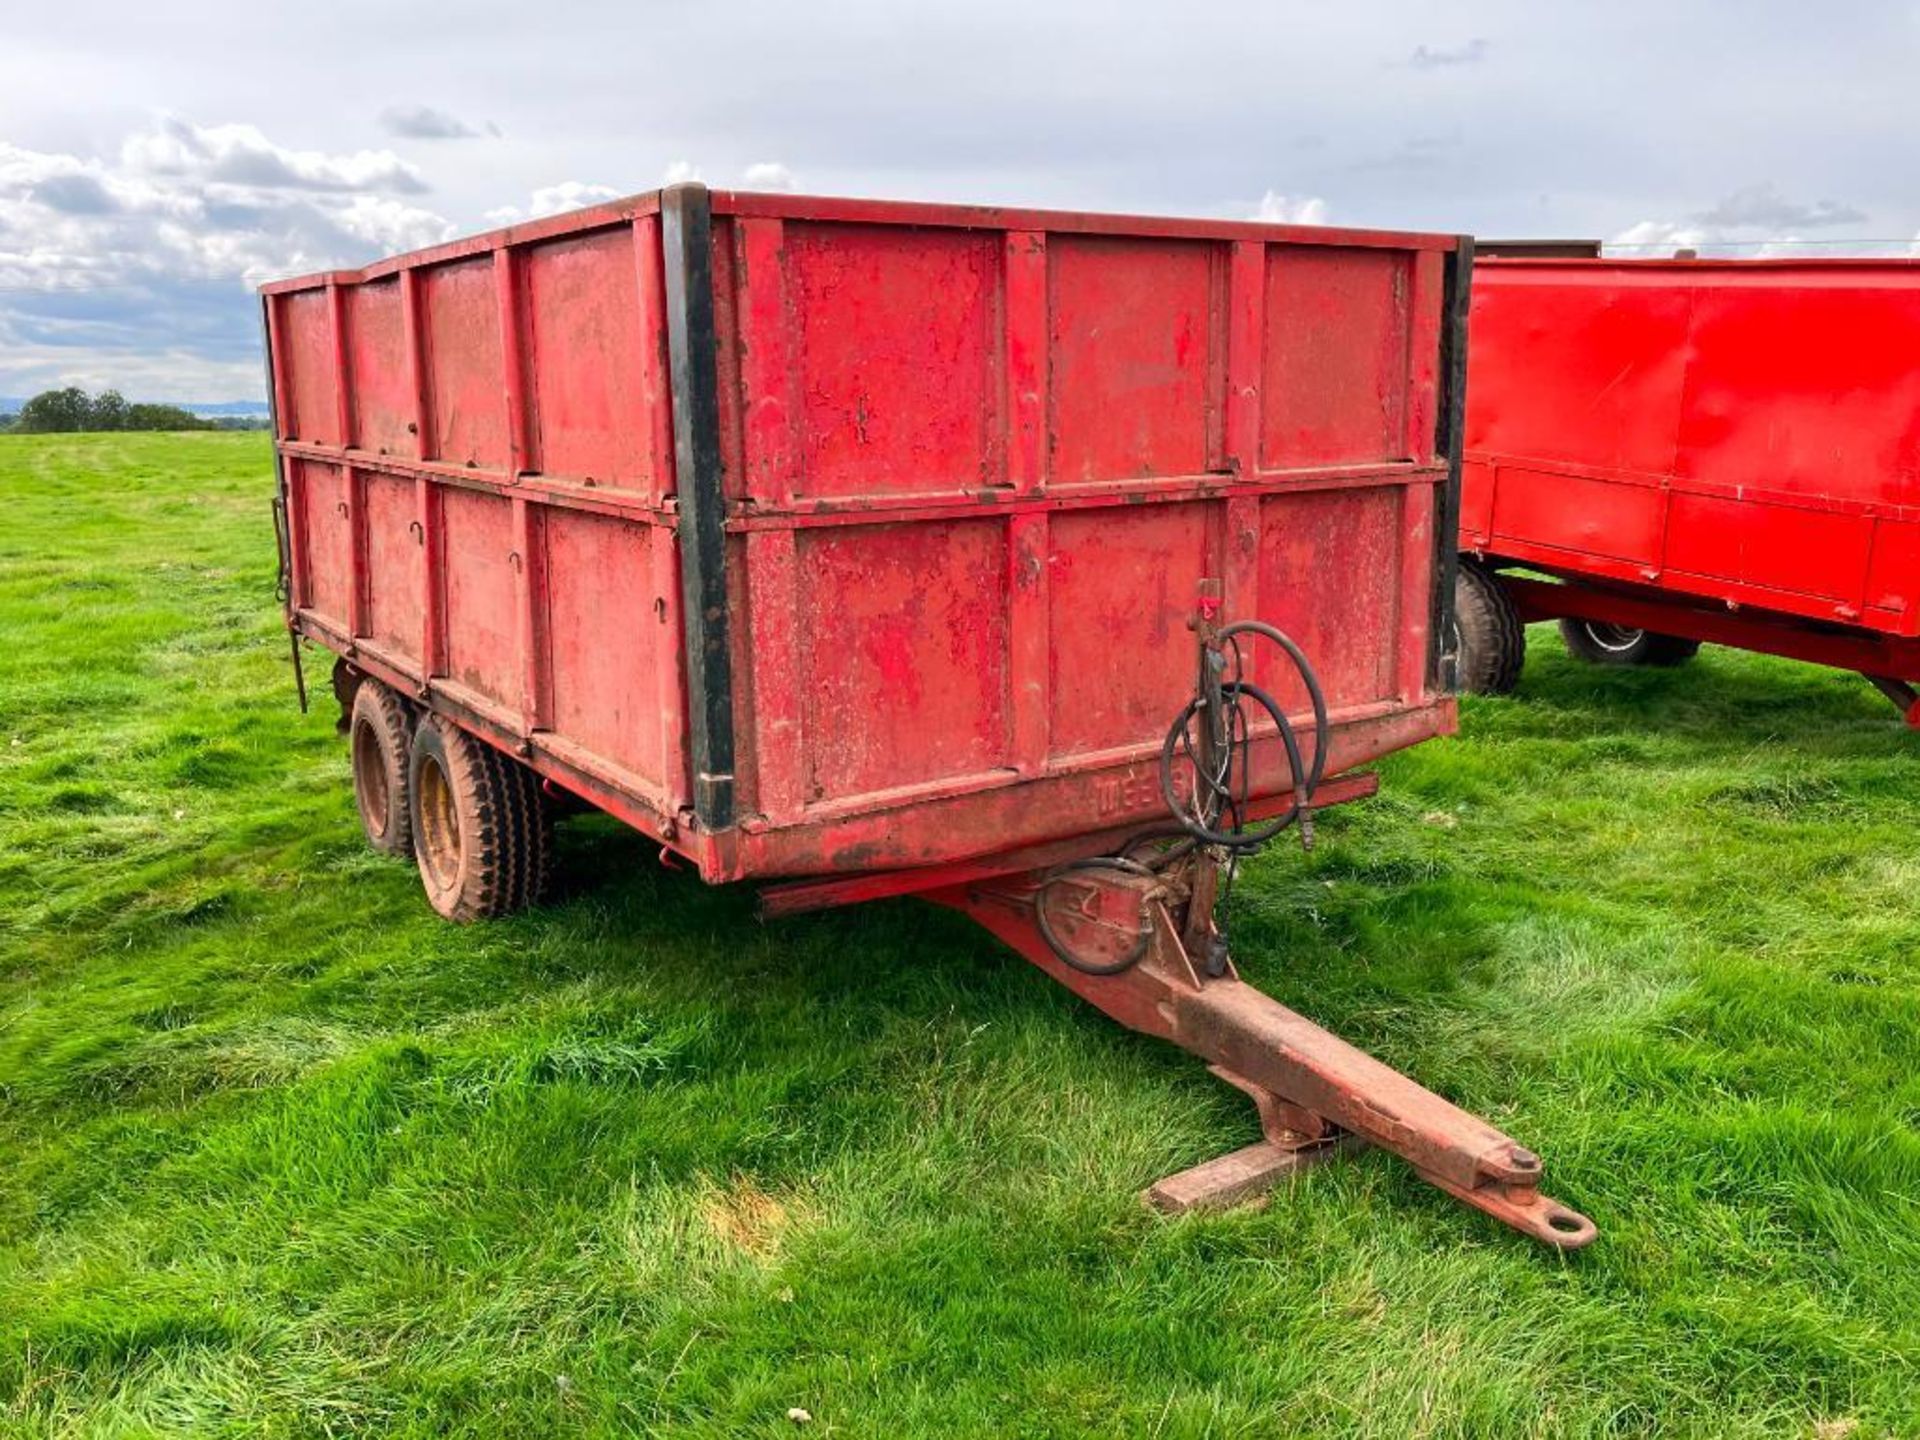 1977 Weeks 8t twin axle dropside trailer with manual tailgate and grain chute on 10.0/75-15.3 wheels